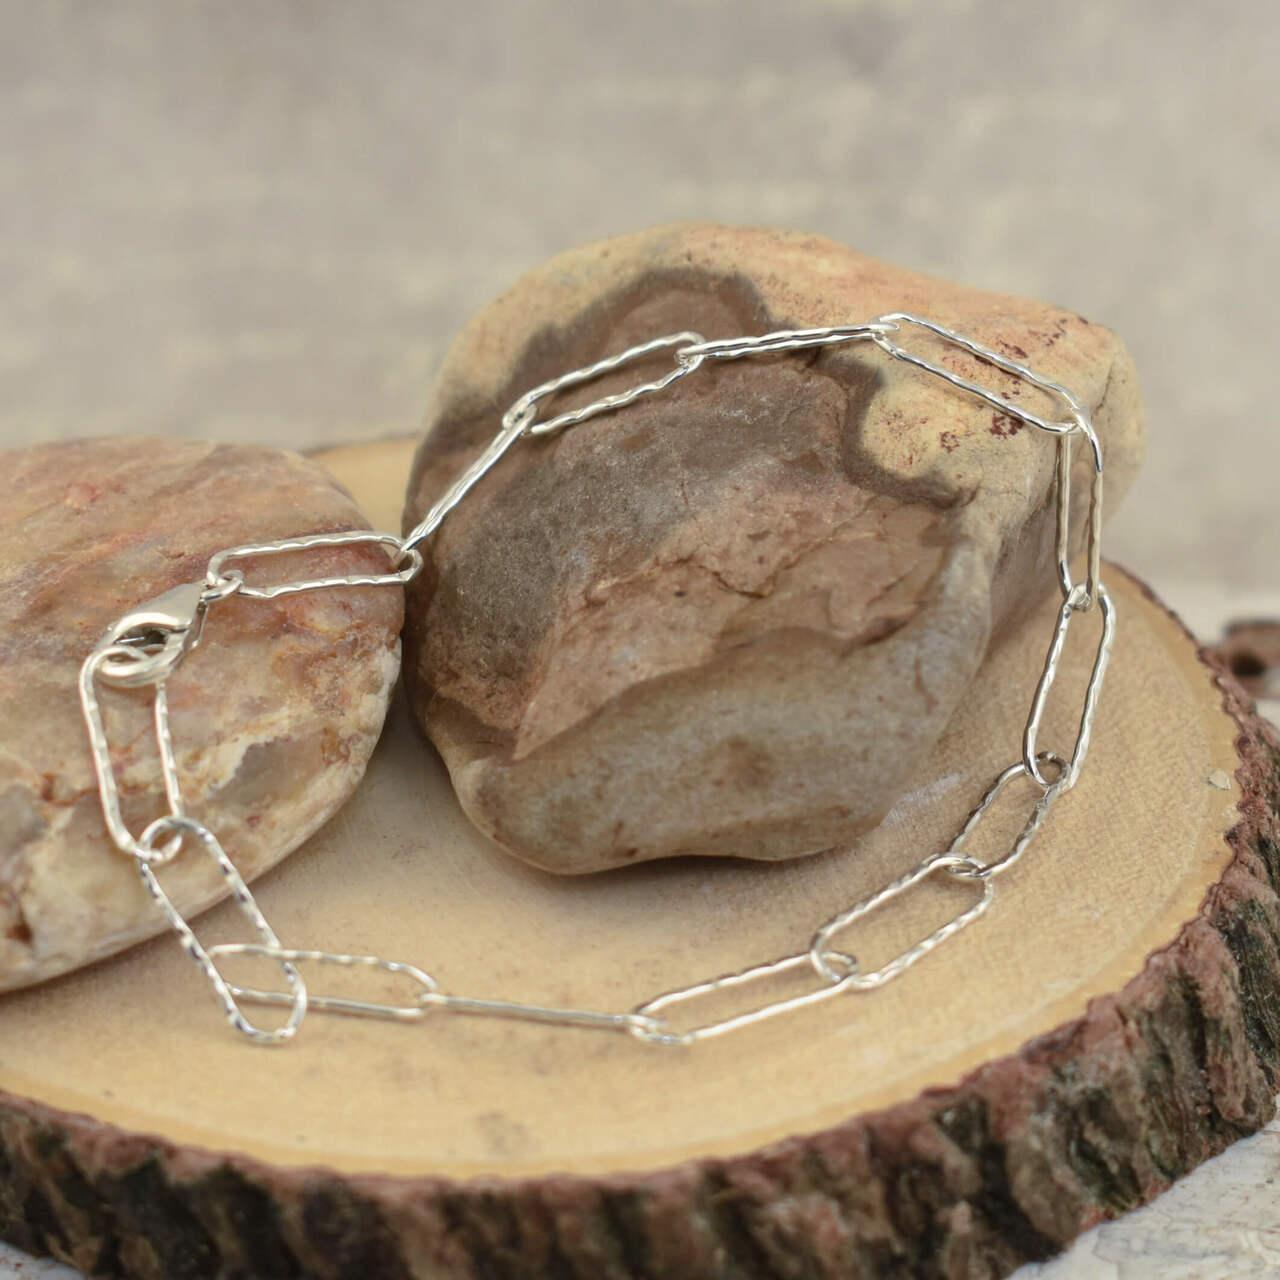 Handcrafted sterling silver paperclip chain link bracelet